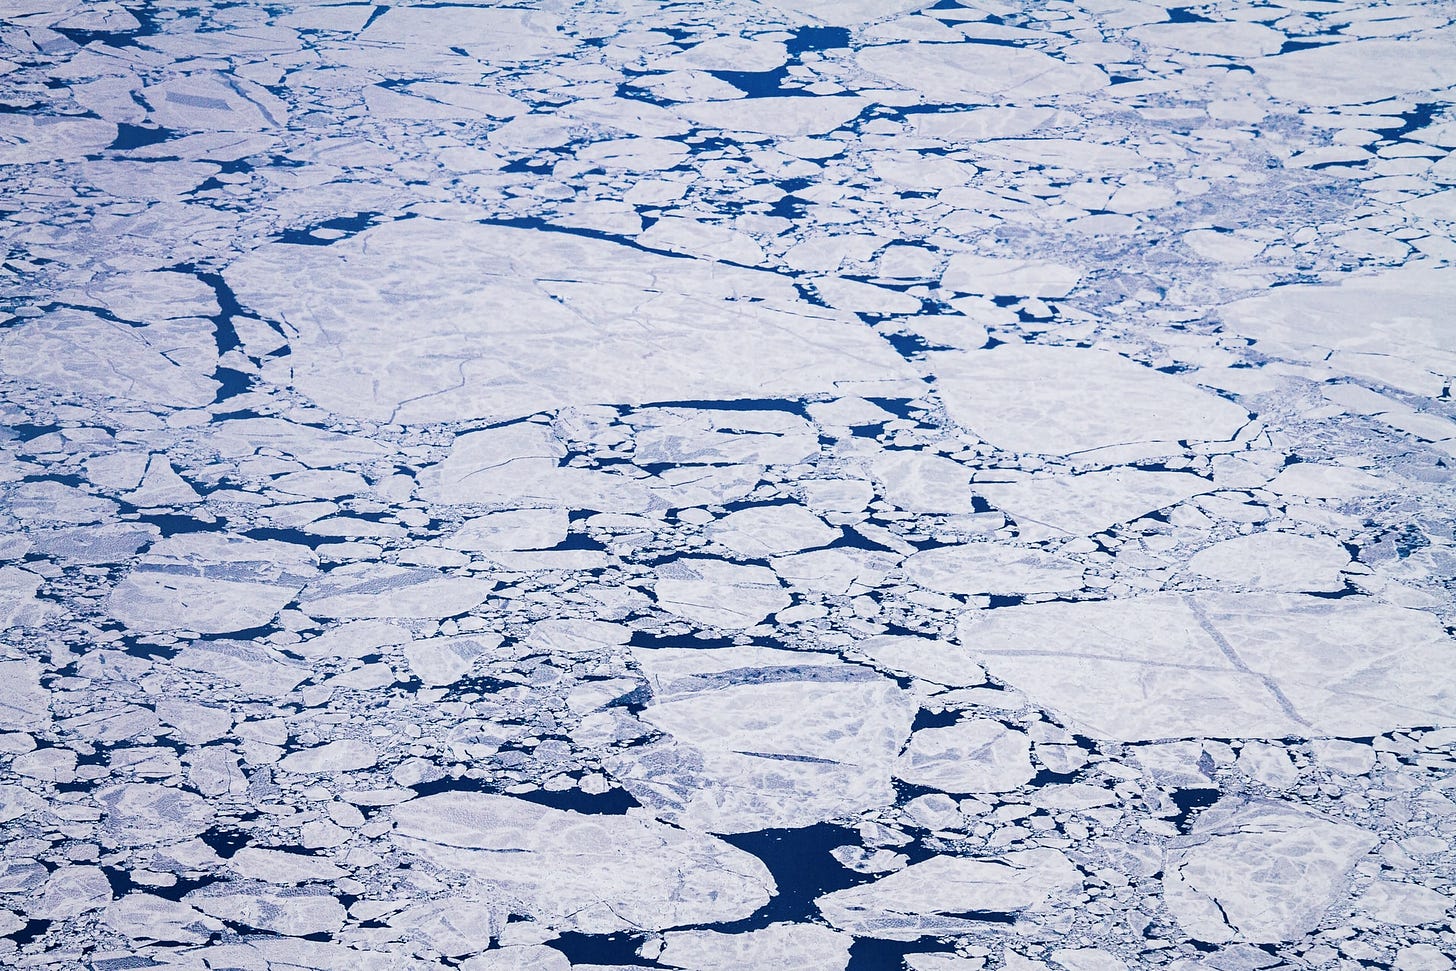 Photograph of ice floes